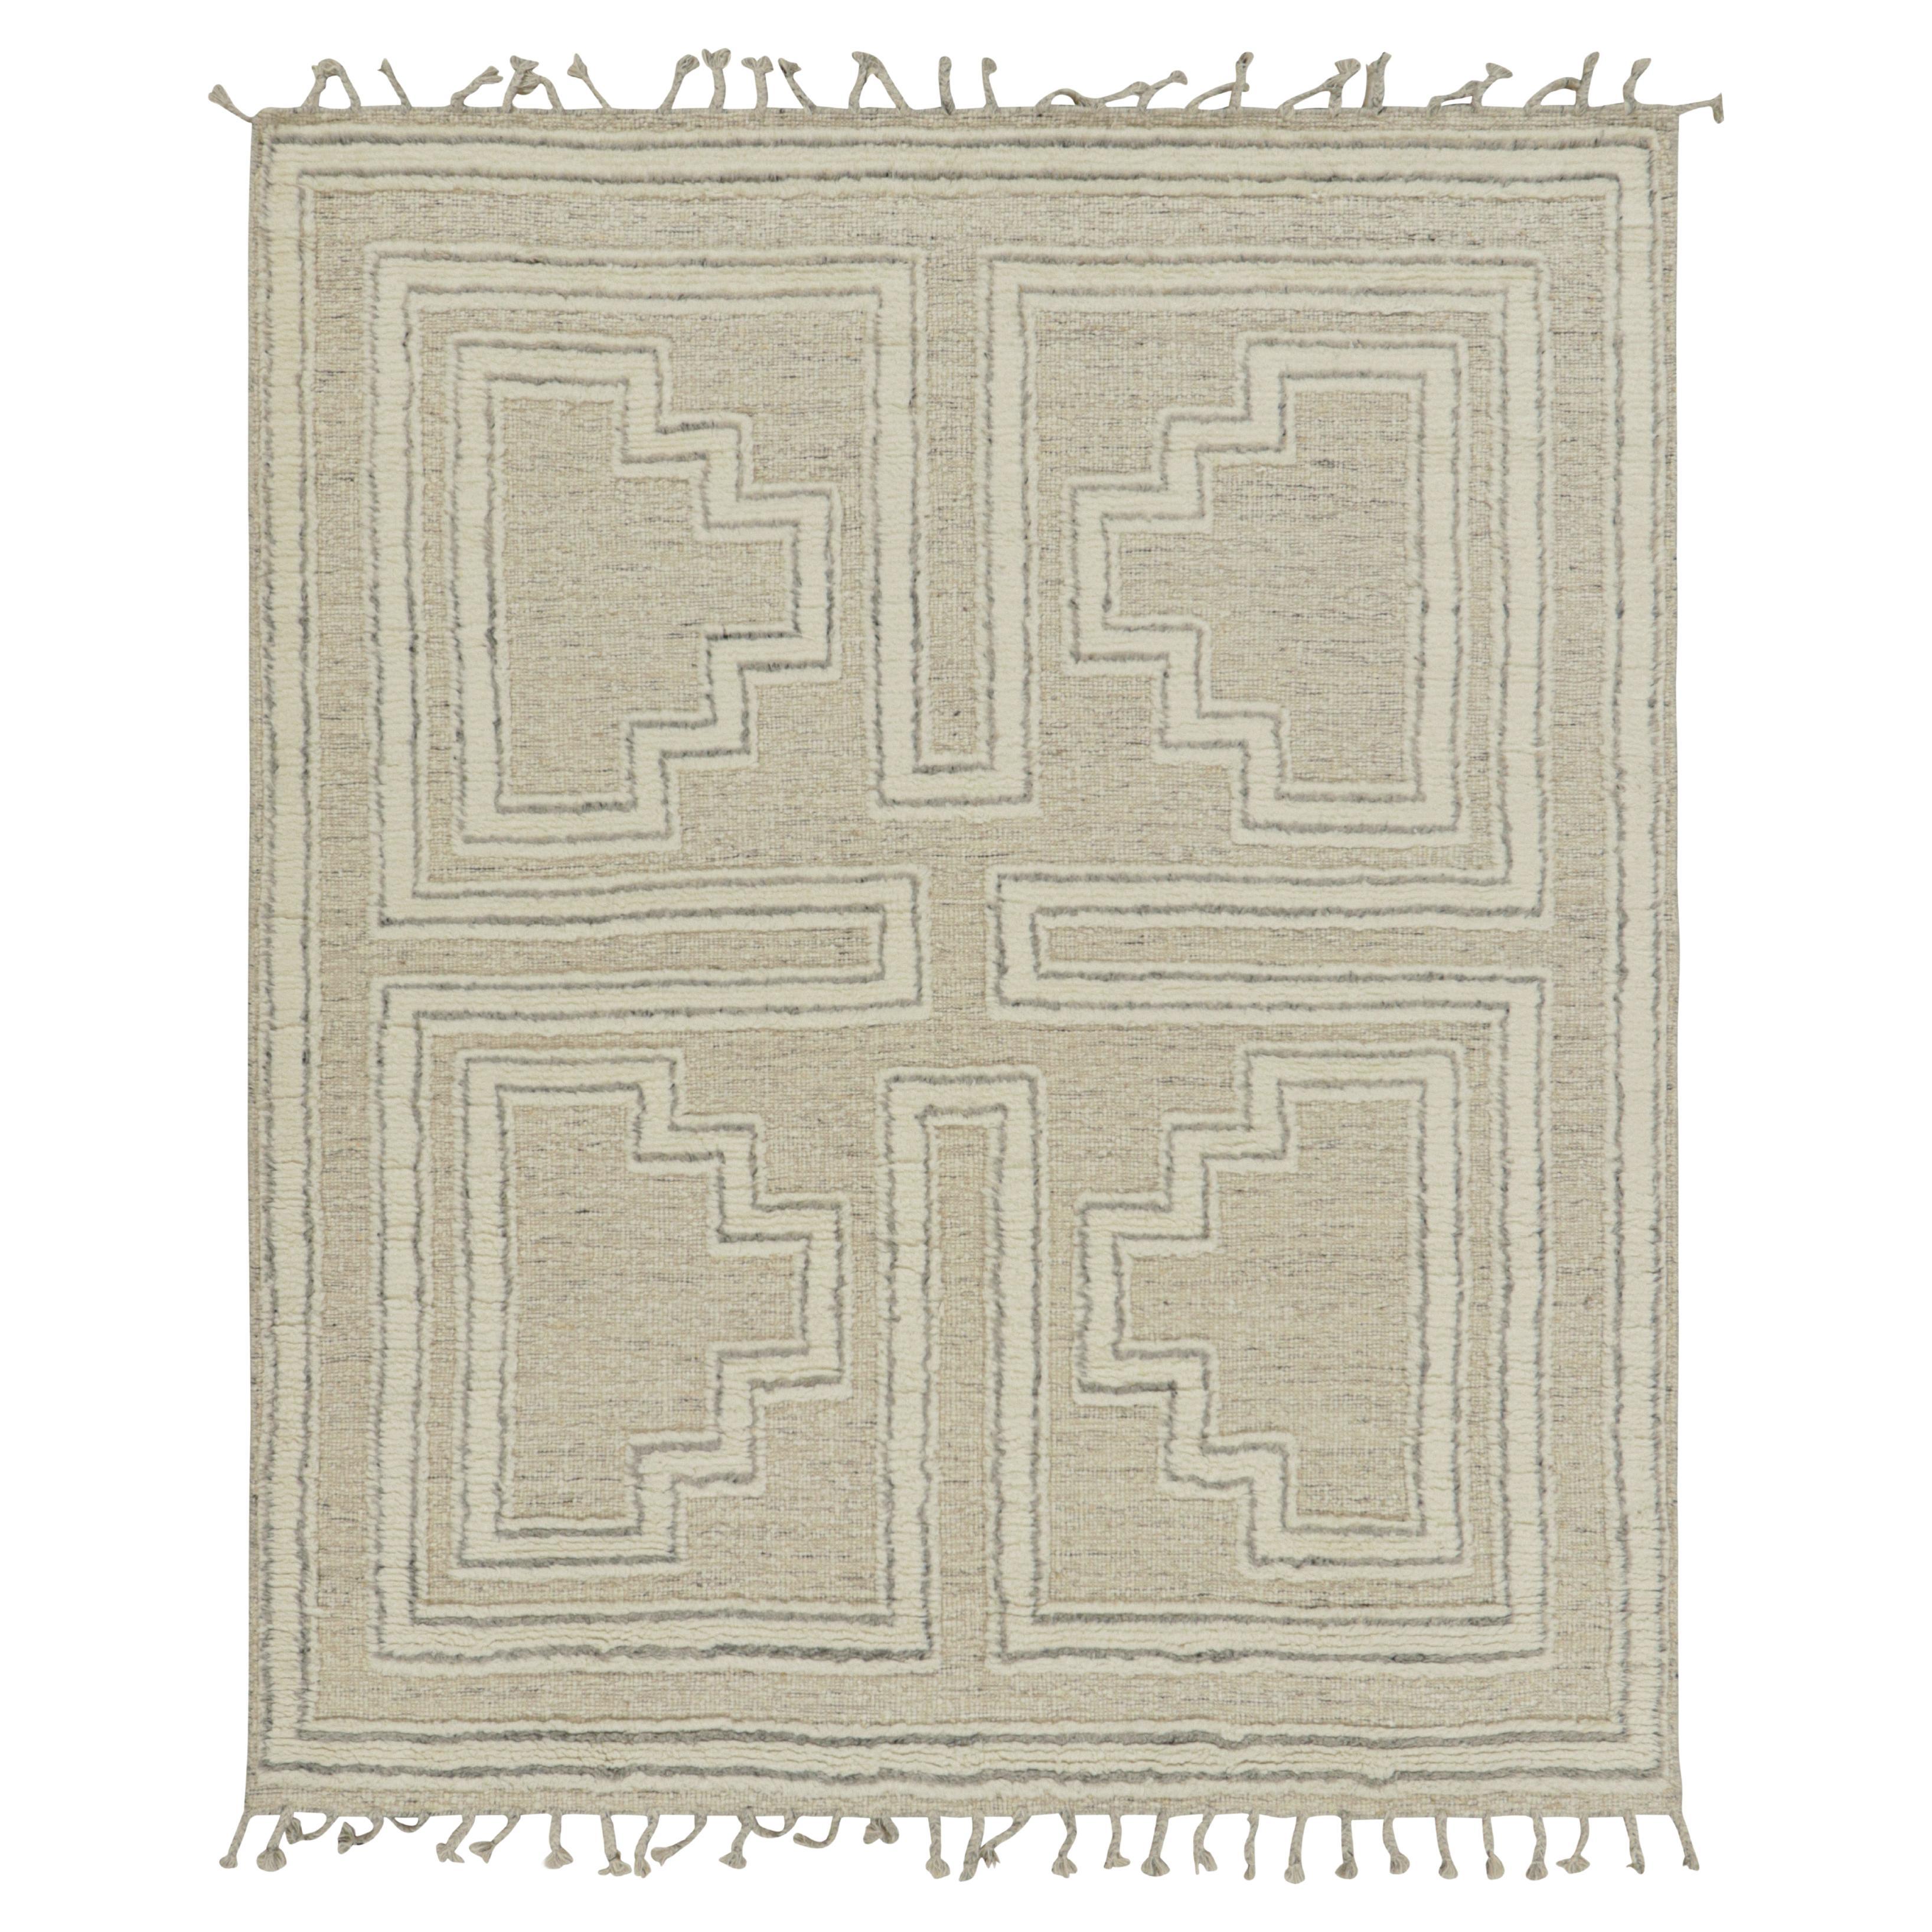 Rug & Kilim’s Modern Rug with White High-Low Geometric Patterns For Sale